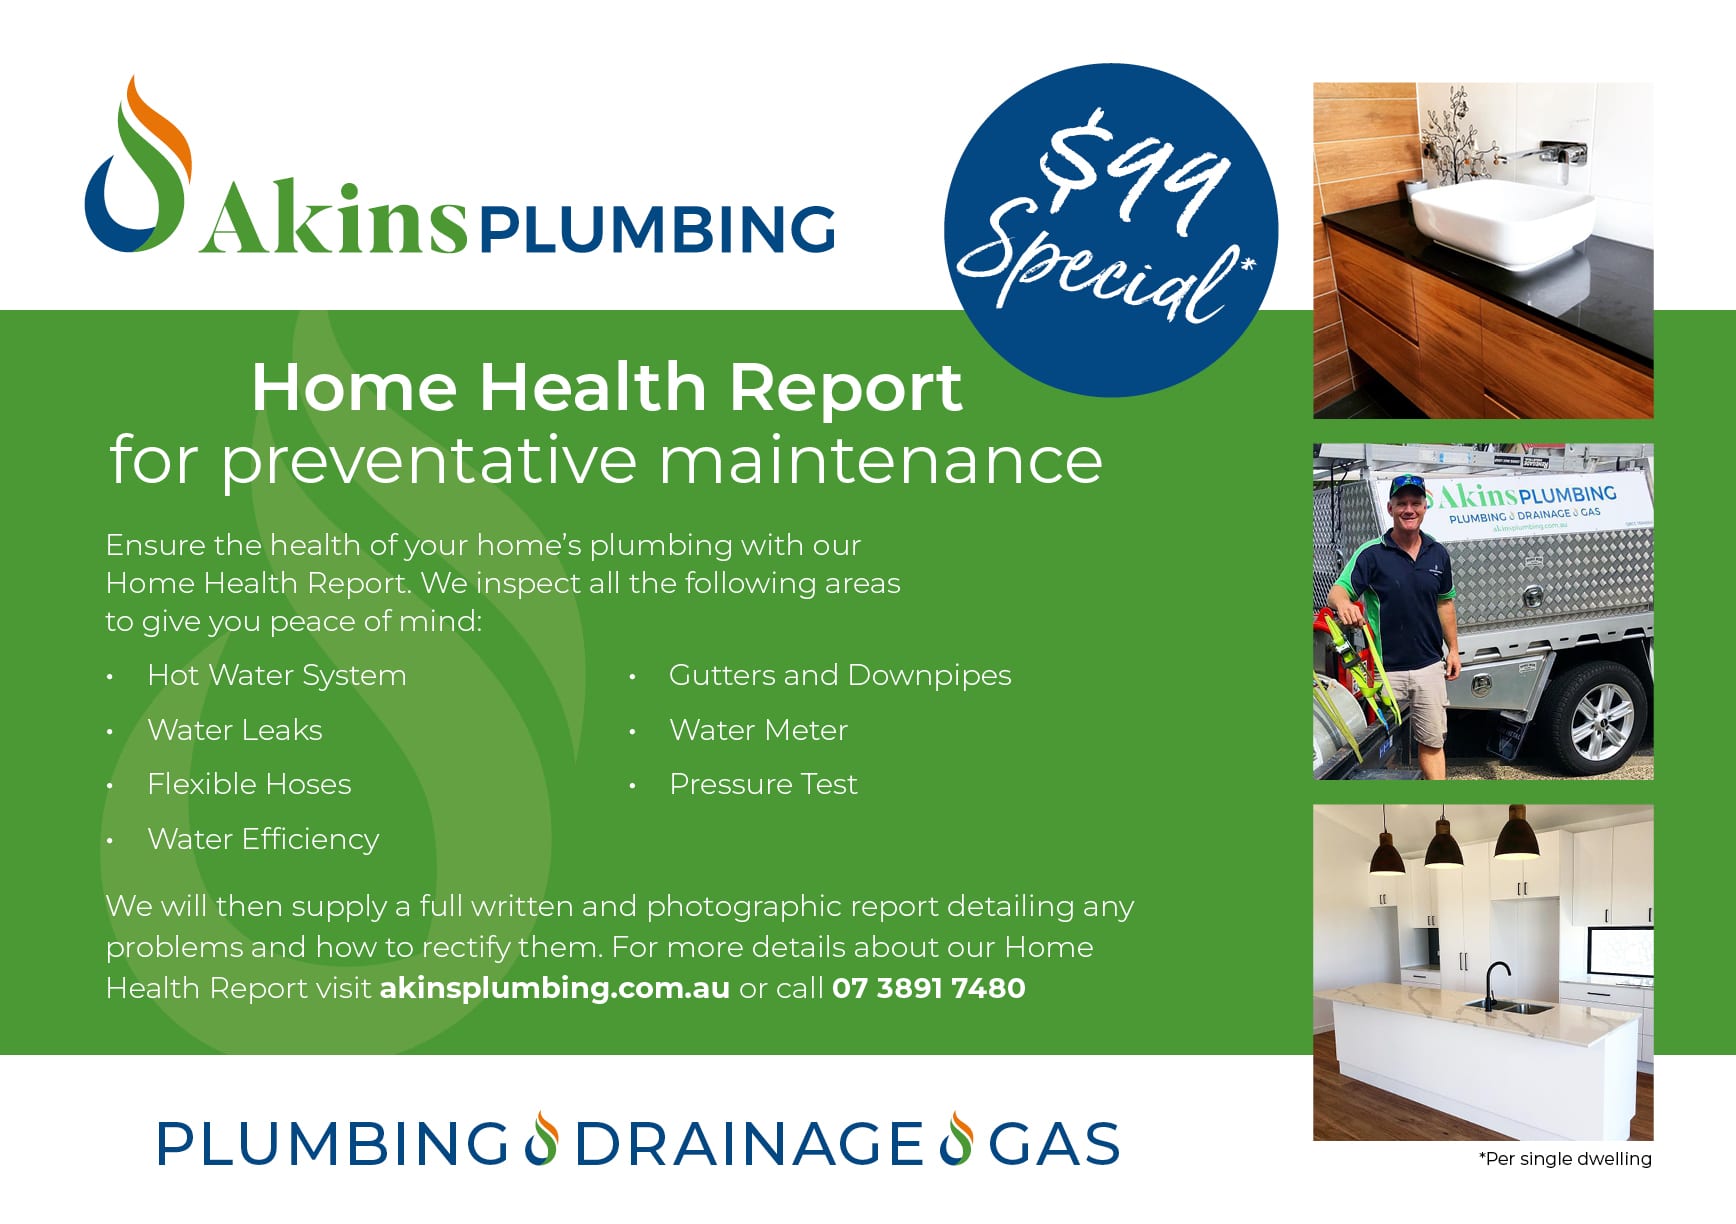 Image of Akins Plumbing $99 Special for Home Health Report for preventative maintenance | Featured image on Sustainable Plumbing Brisbane | Featured image for Sustainable Plumbing Brisbane.